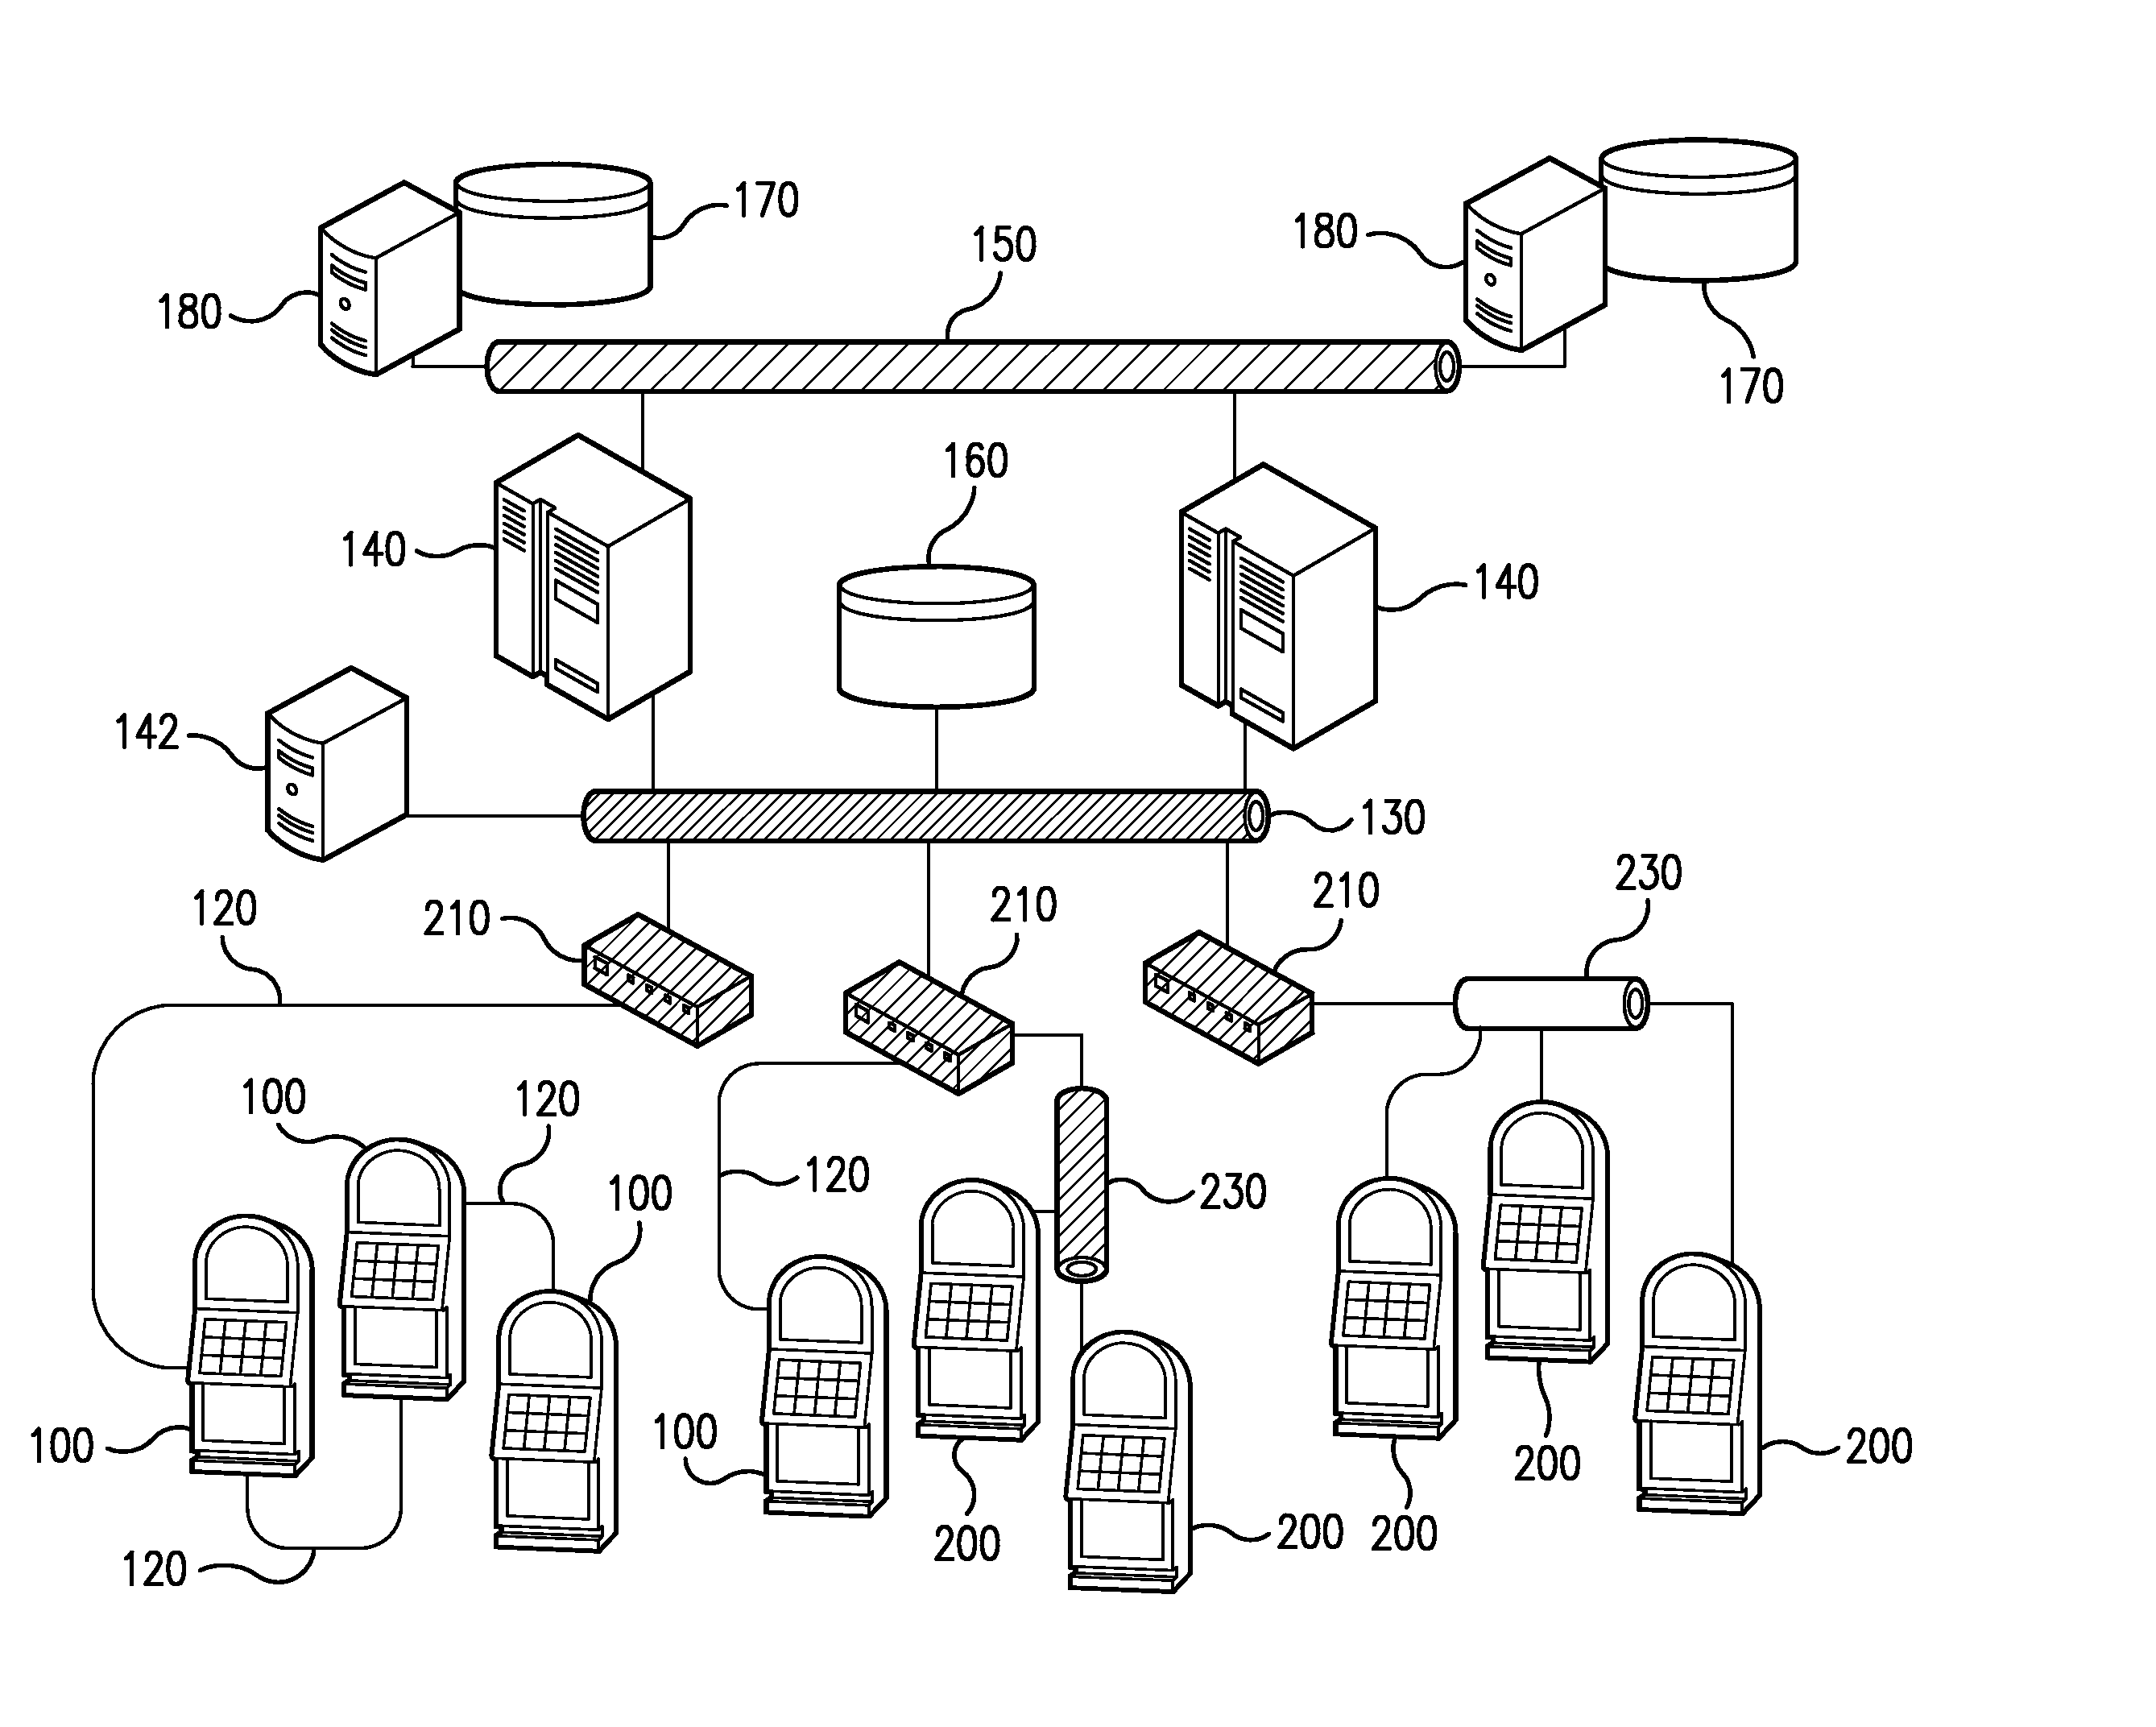 Affiliated gaming system and method